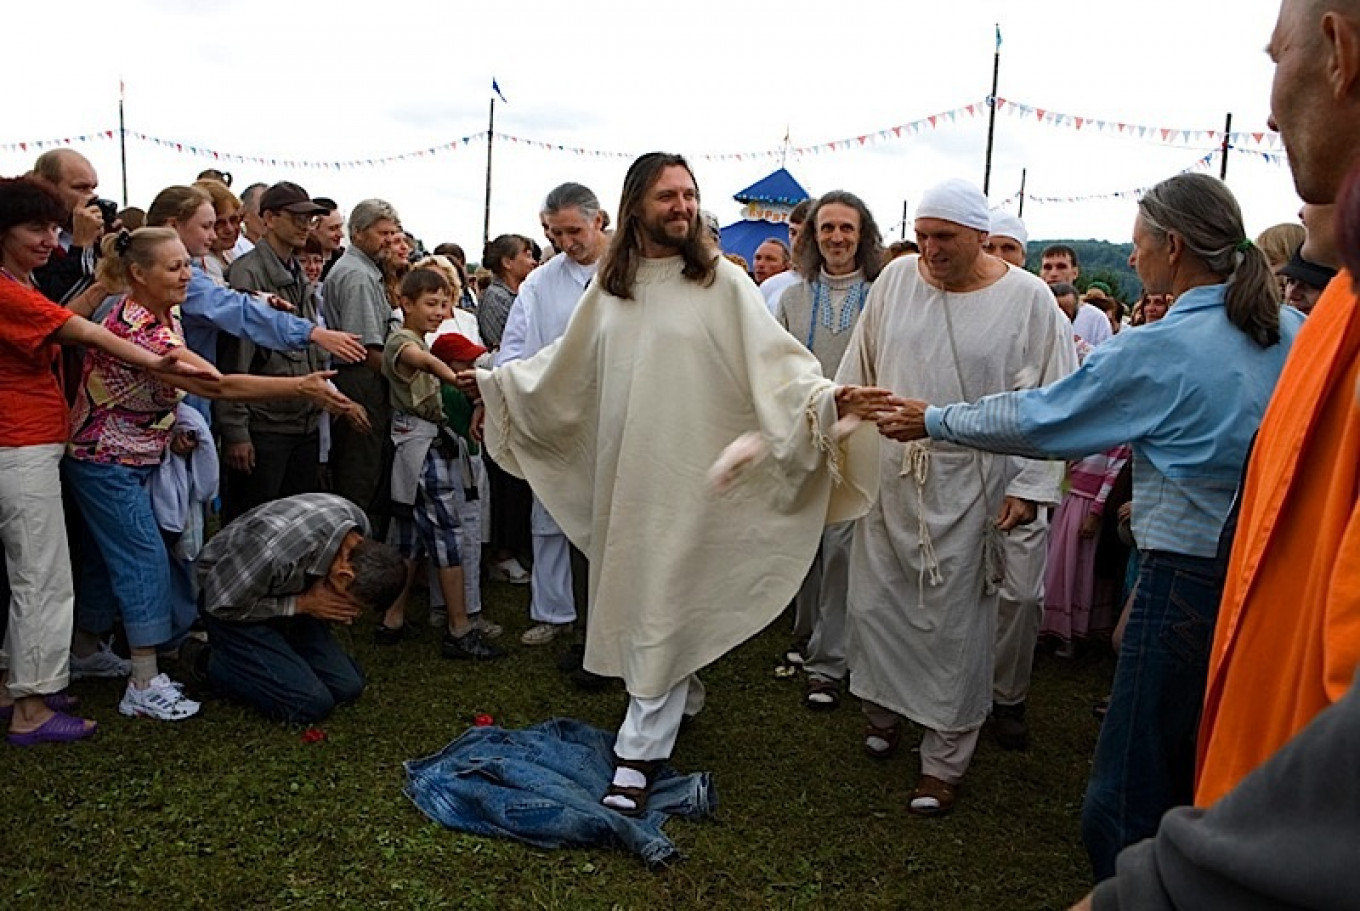 Russian Authorities Storm Siberian Commune, Arrest Messianic Cult Leader - The Moscow Times